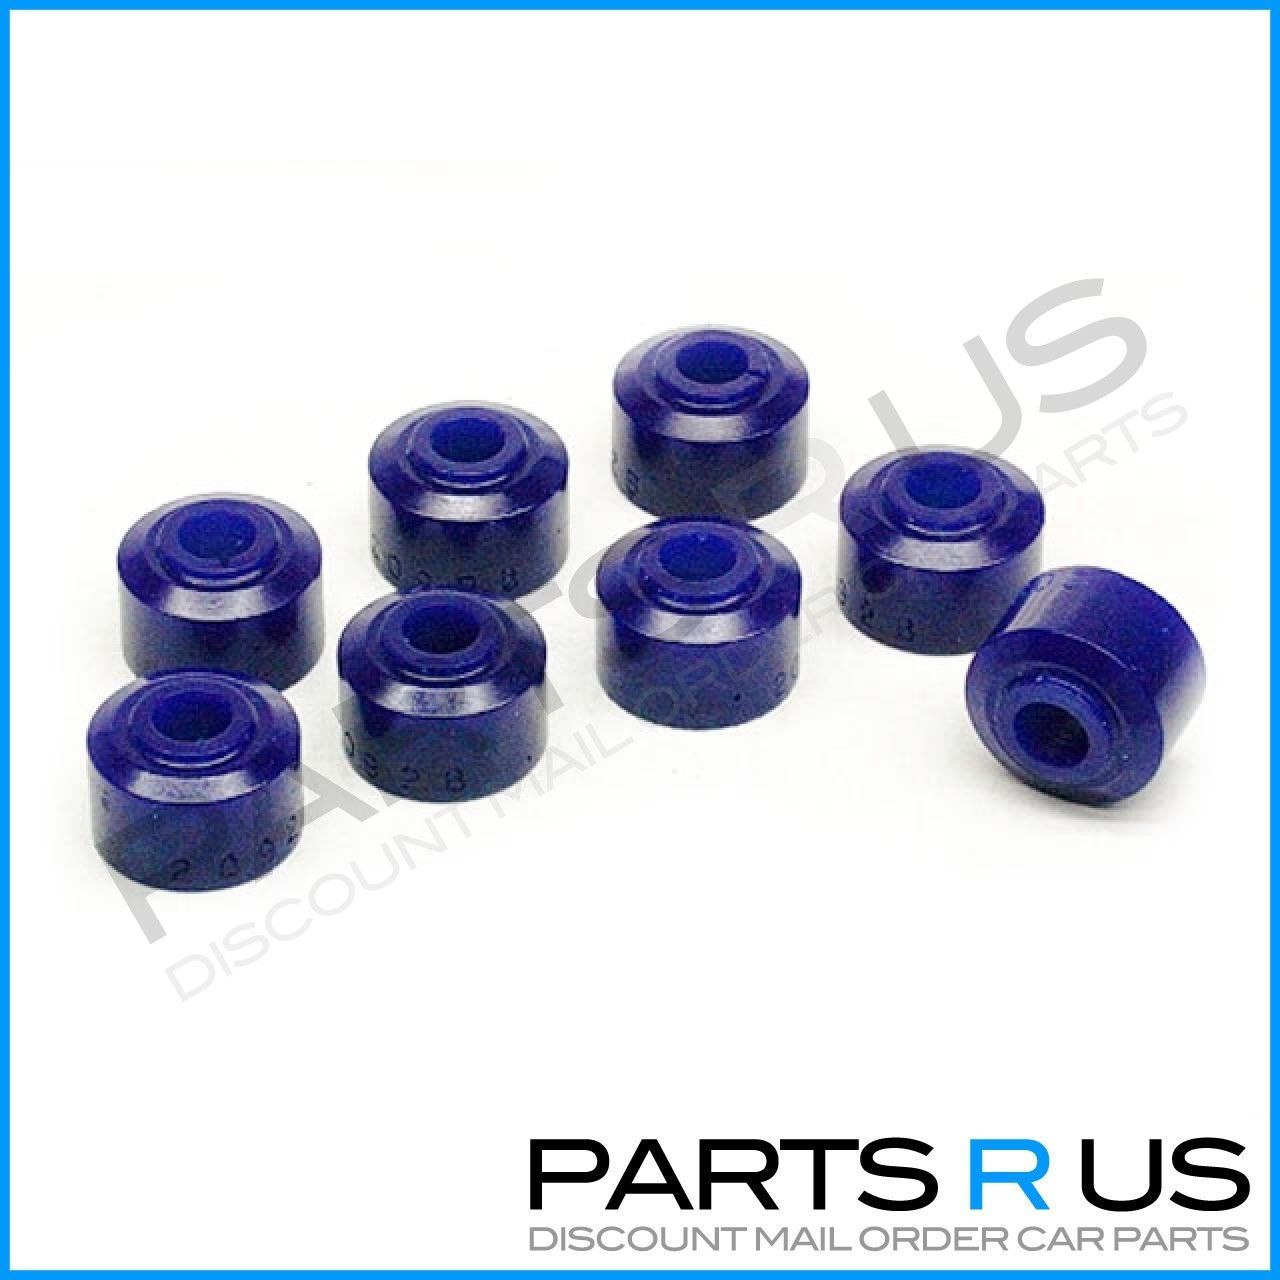 Sway Bar Bushes Kit to suits Toyota Landcruiser 80 Series Rubber Replacement